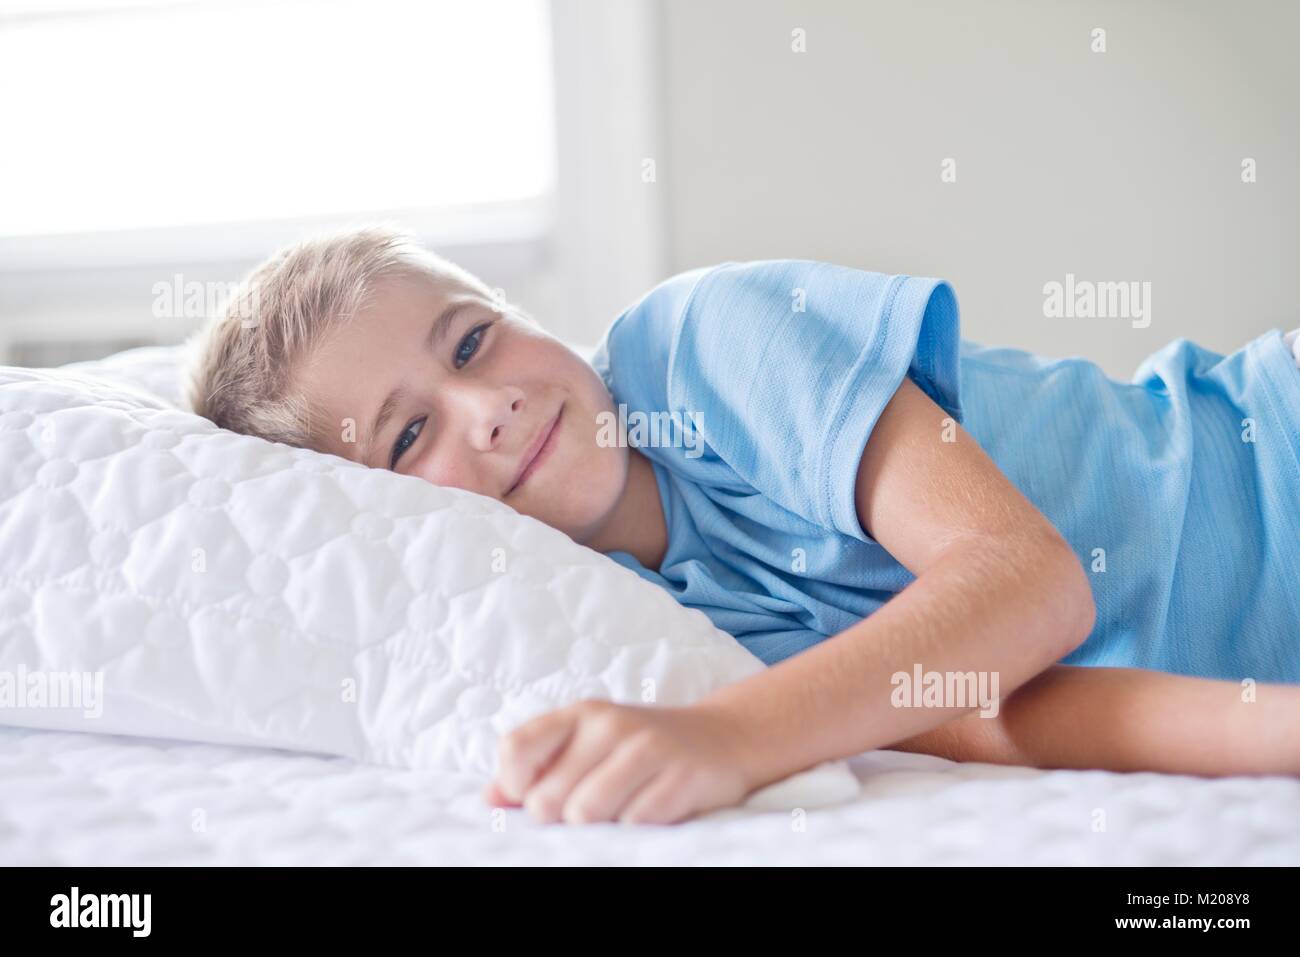 Young boy lying with head on pillow, smiling. Stock Photo